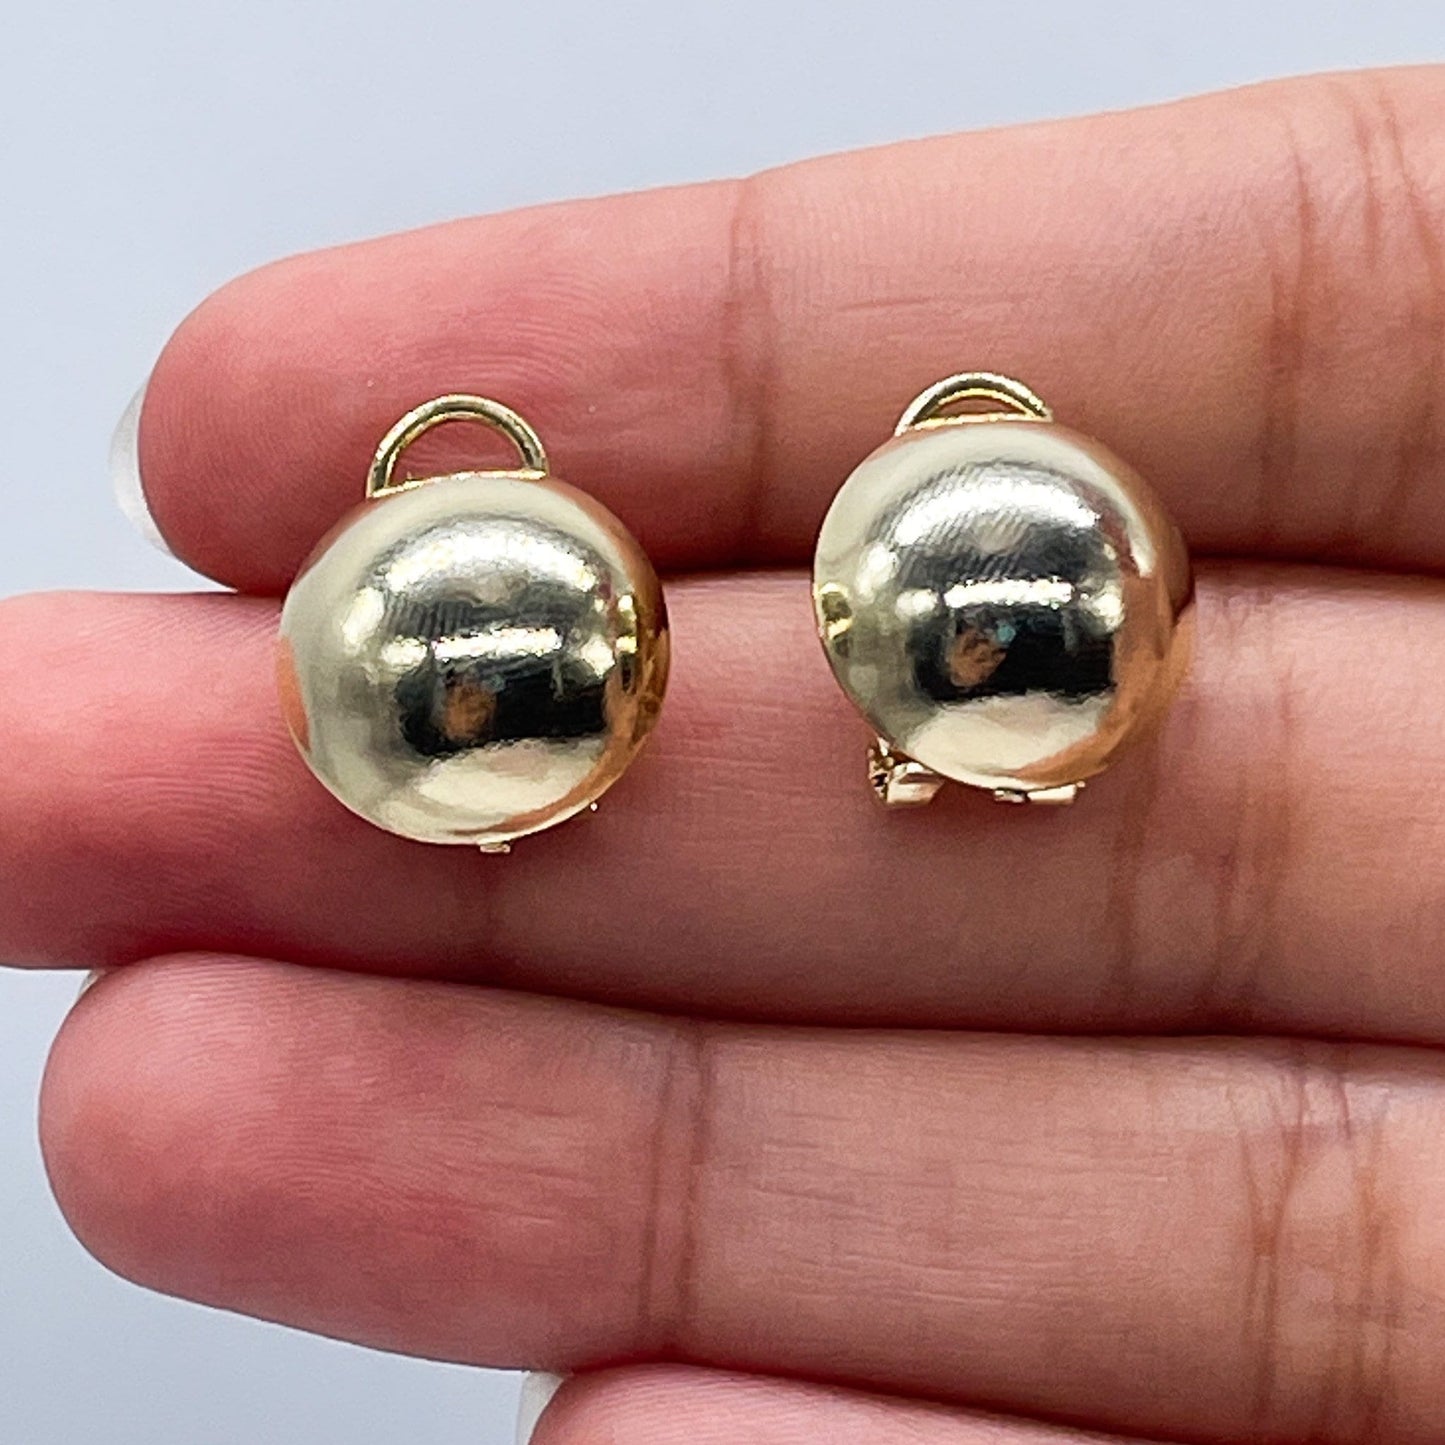 18k Gold Layered Concave Round Stud Earrings With Safe Post And Clip, Half Ball